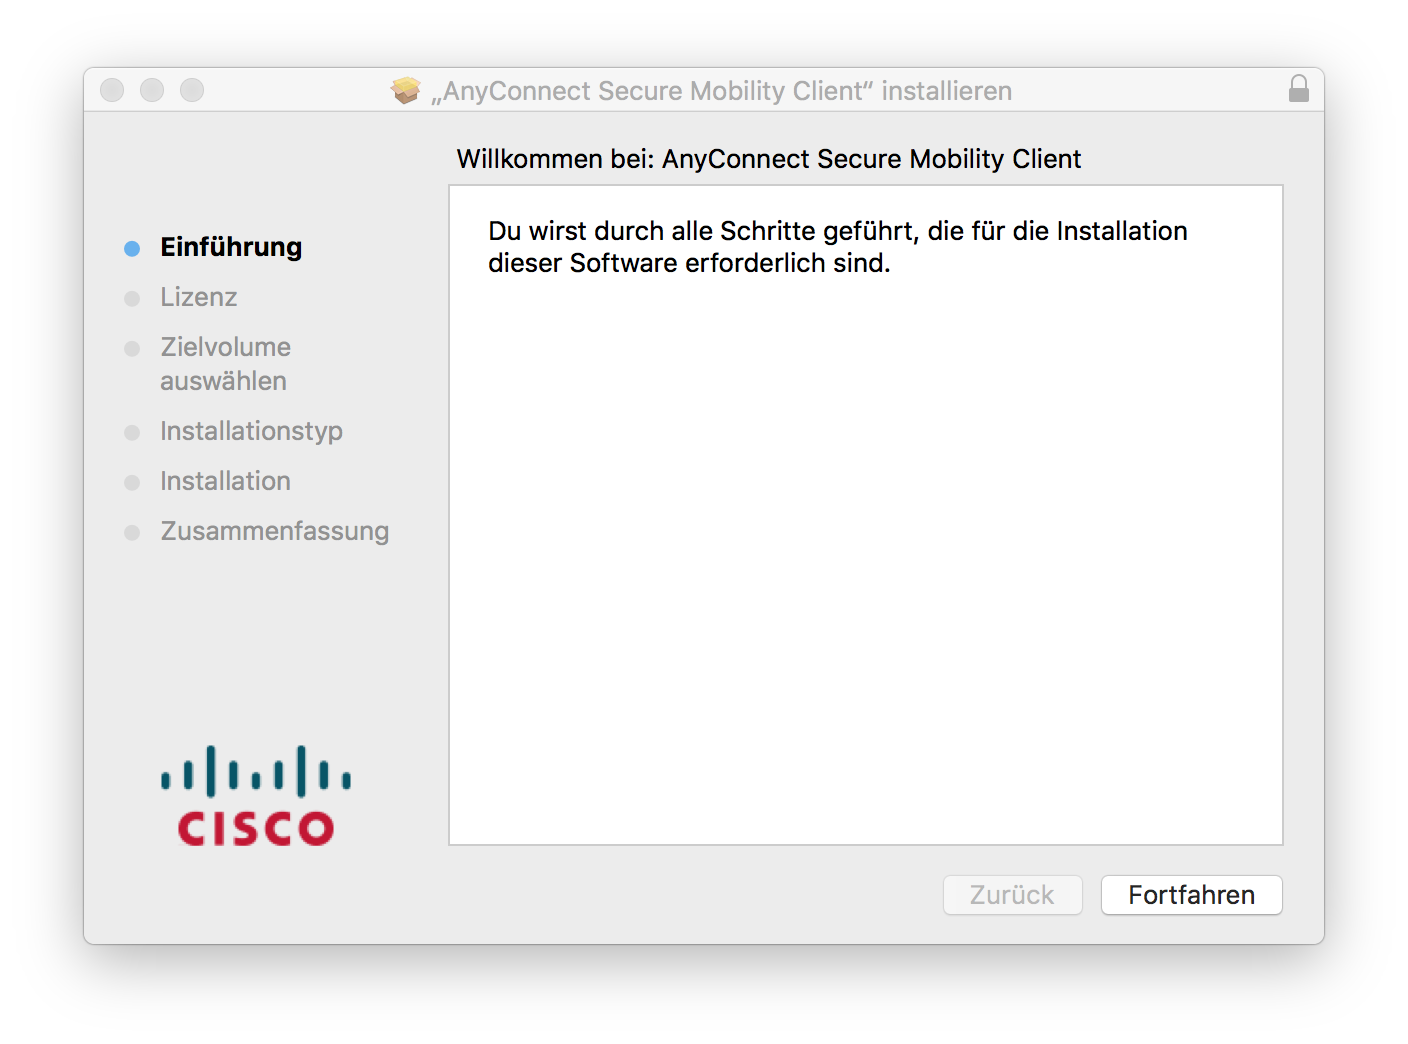 [Translate to English:] AnyConnect Installer macOS